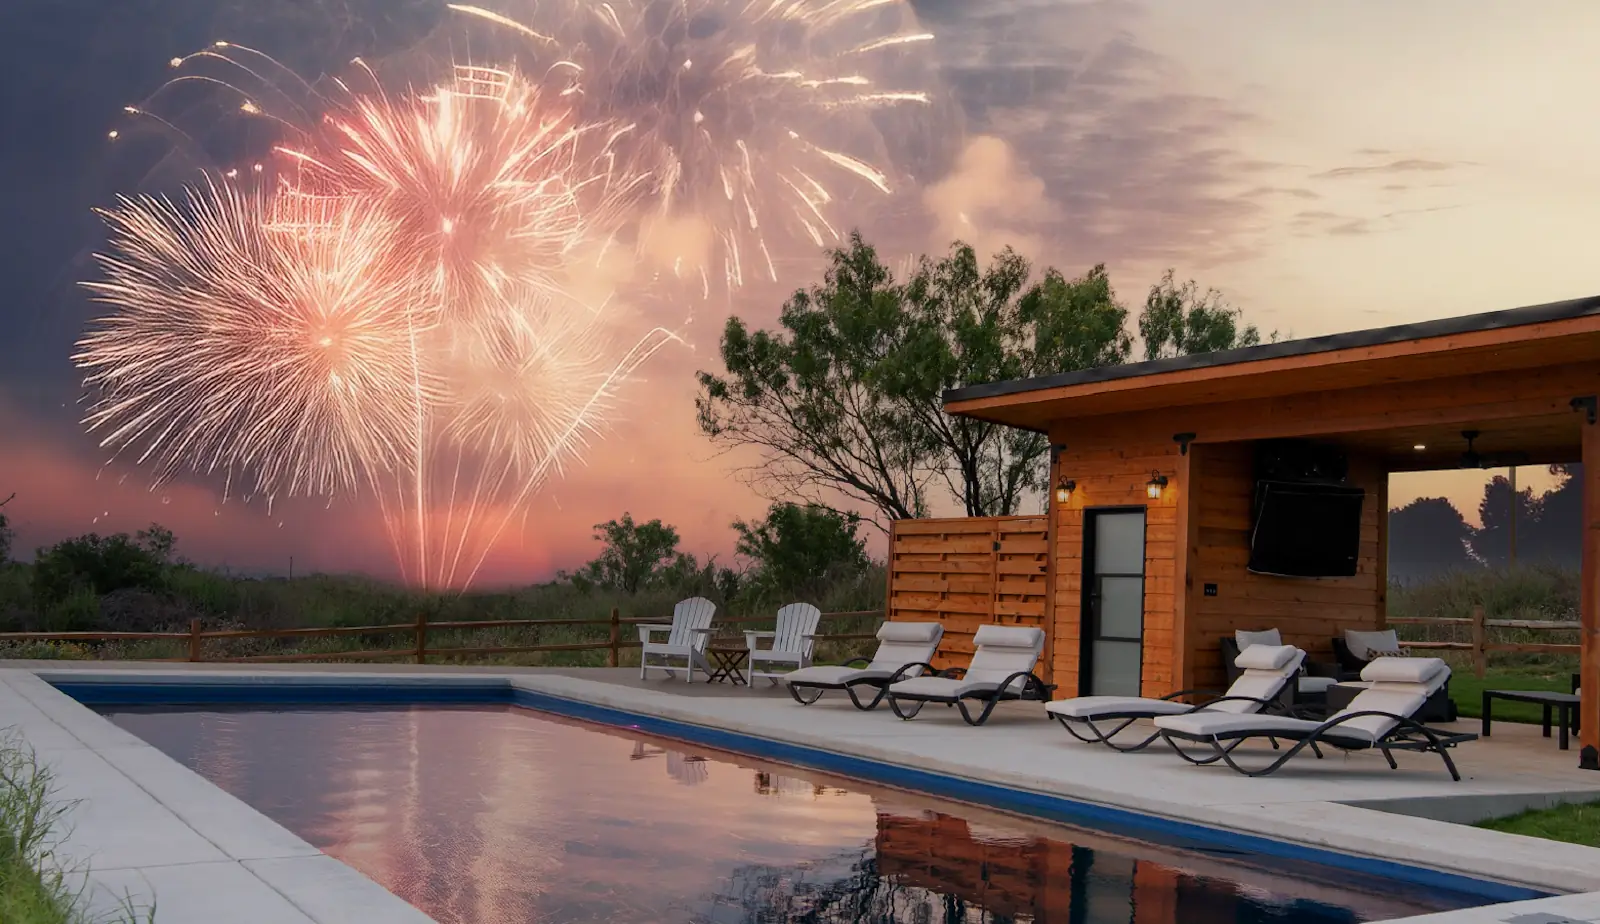 Independence Day Celebration Ideas Around the Pool